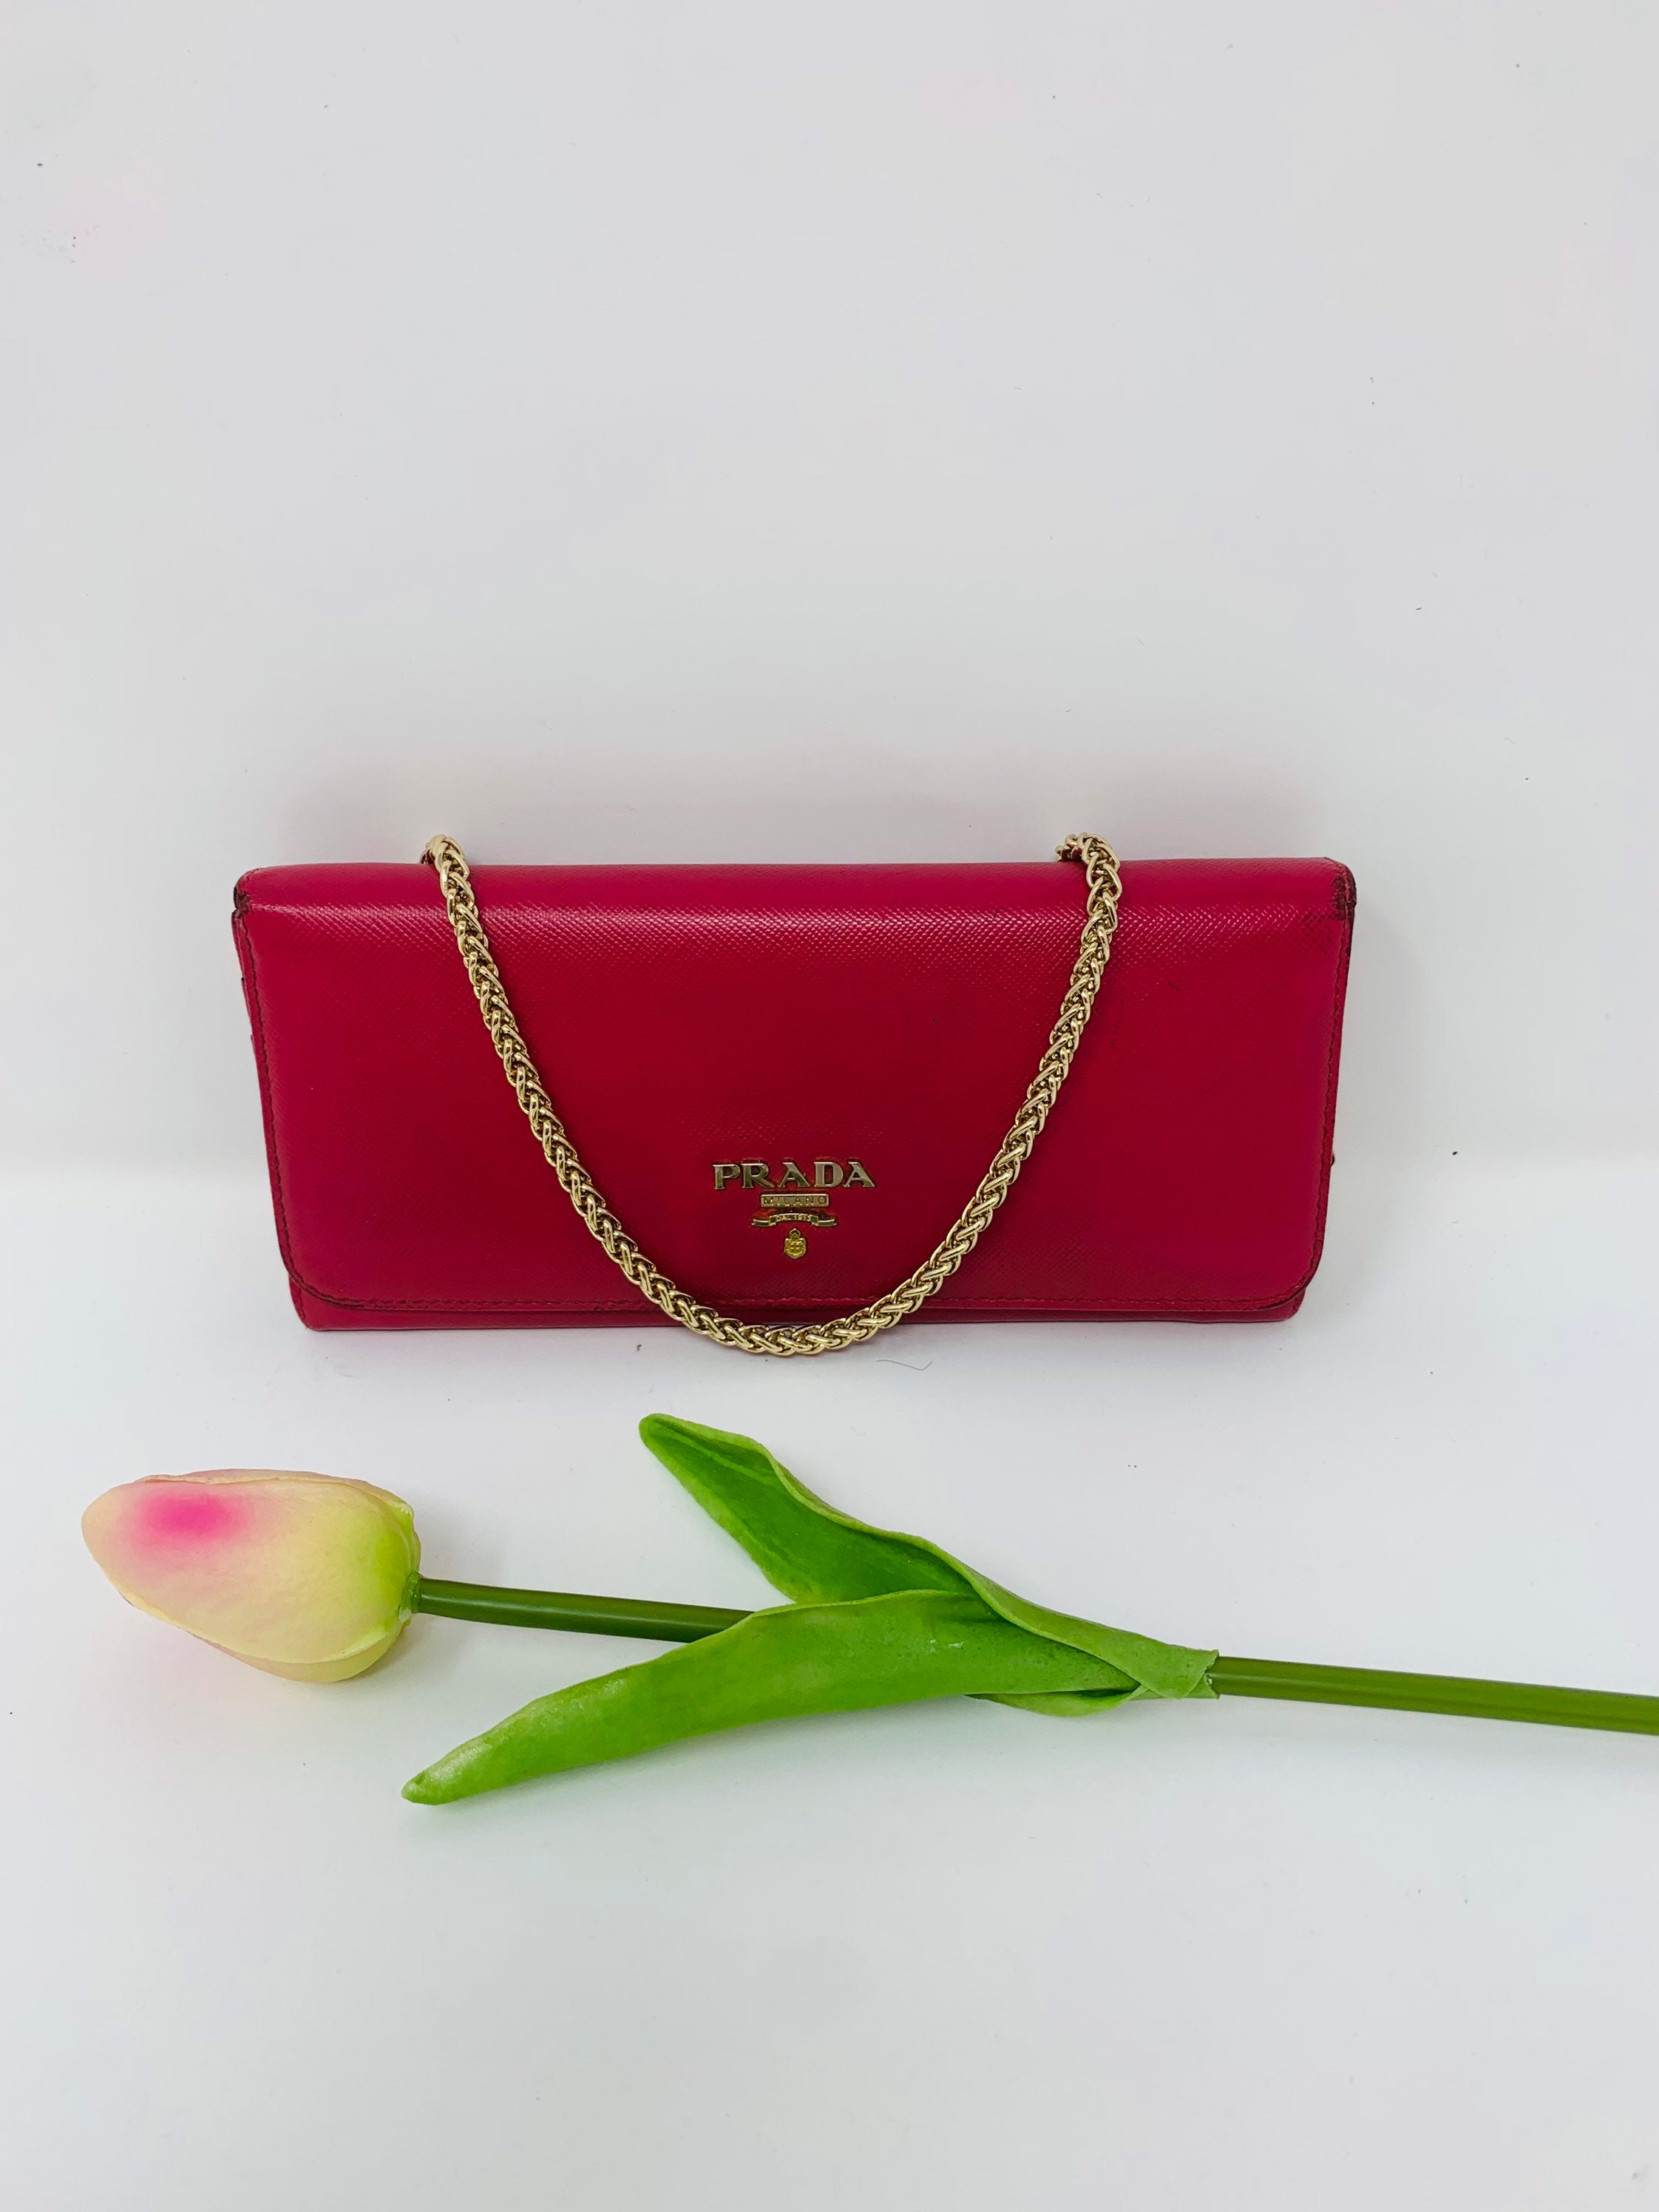 prada wallet on chain red